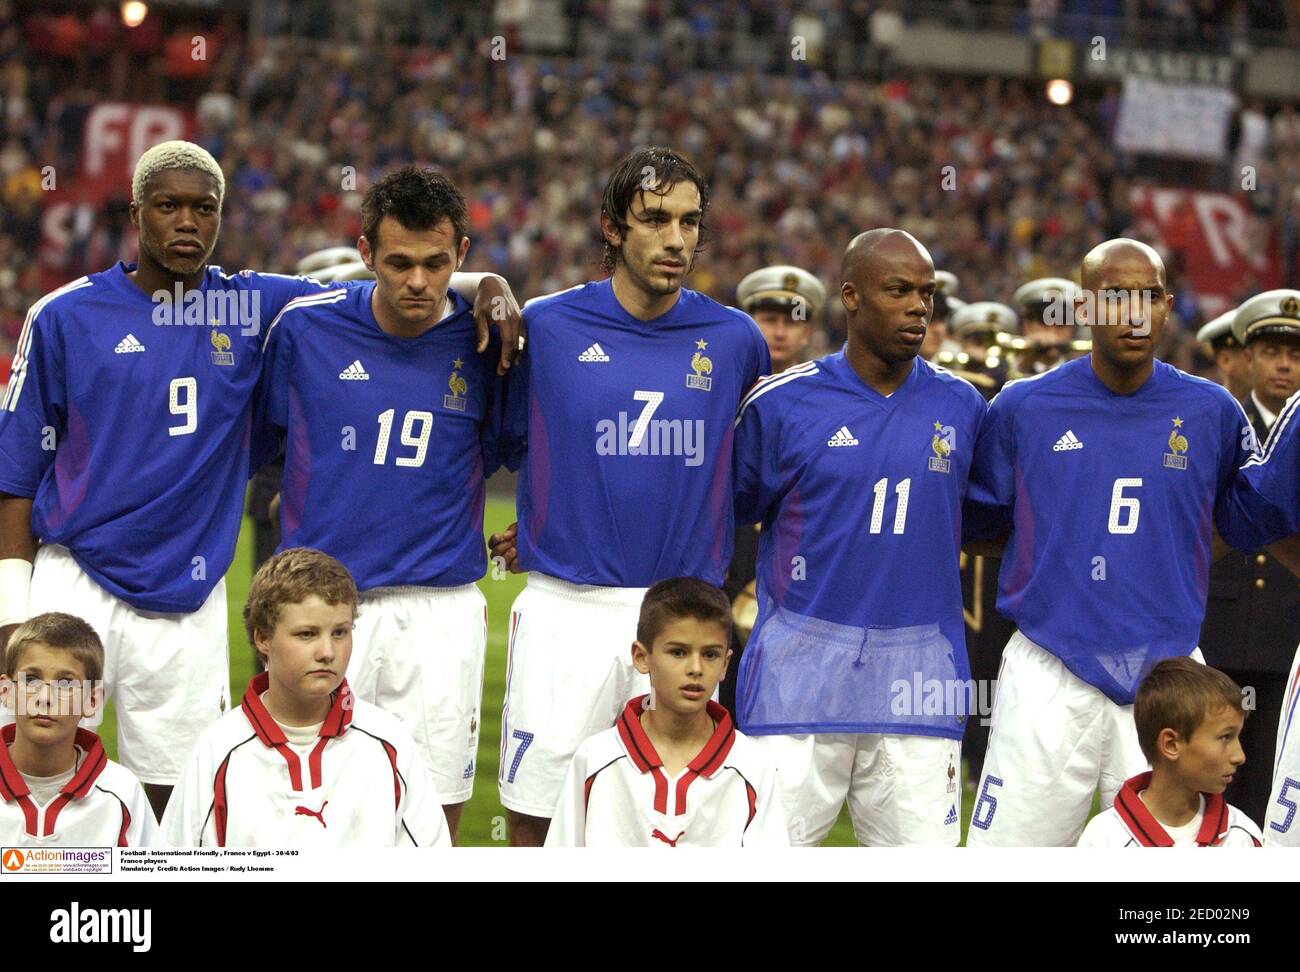 Football - International Friendly , France v Egypt - 30/4/03 Thierry Henry  - France takes free kick against Egypt Mandatory Credit: Action Images /  Rudy Lhomme Stock Photo - Alamy